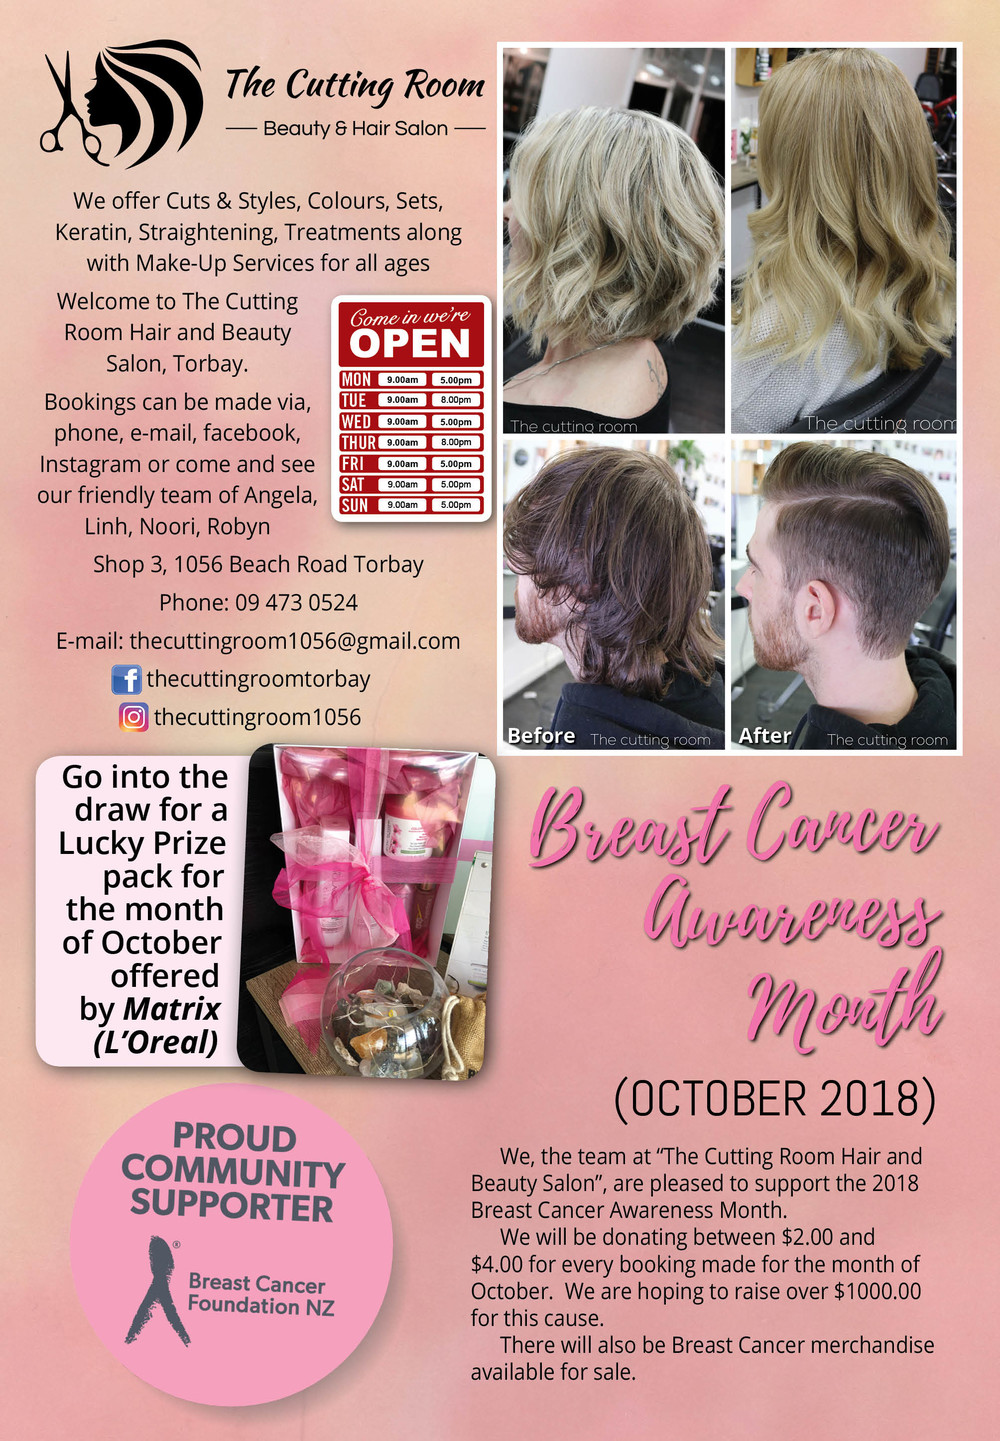 The Cutting Room Breast Cancer Awareness Month